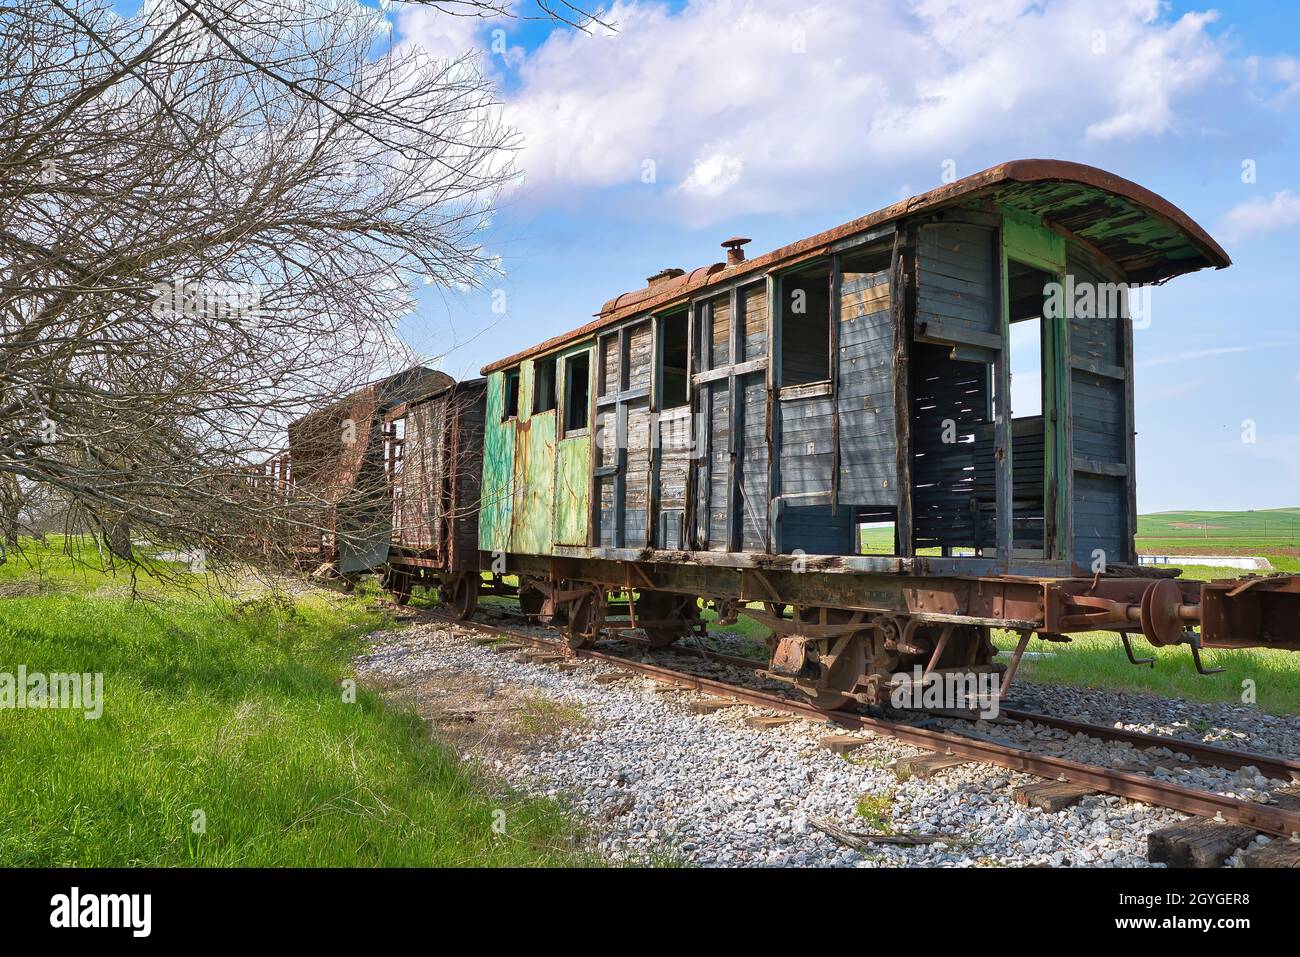 old railway wagons at station,Abandoned old train wagons in an abandoned Stock Photo